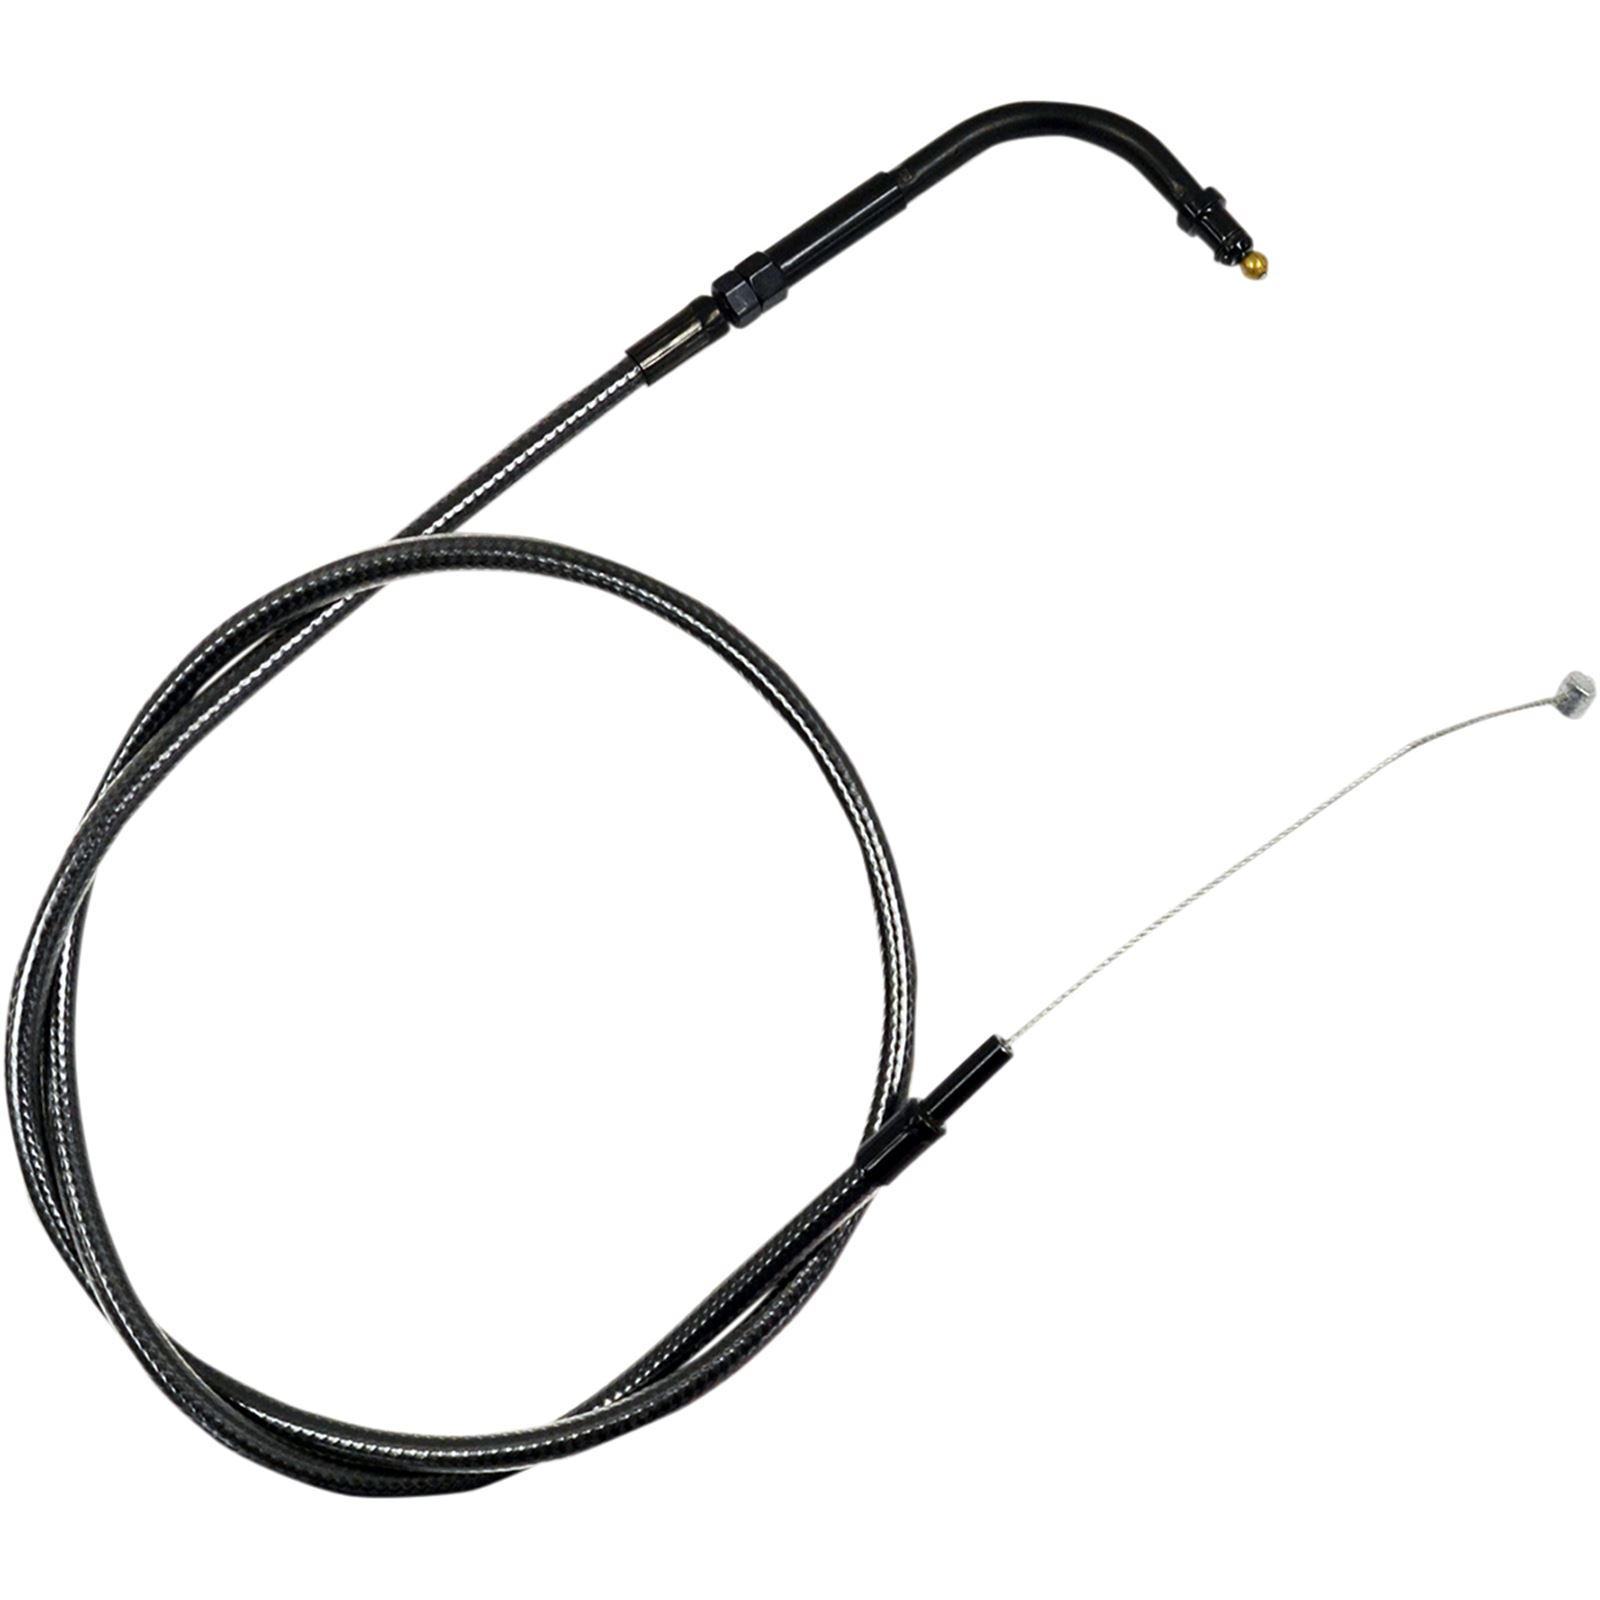 LA Choppers 18" - 20" Midnight Throttle Cable for '07 - '19 XL